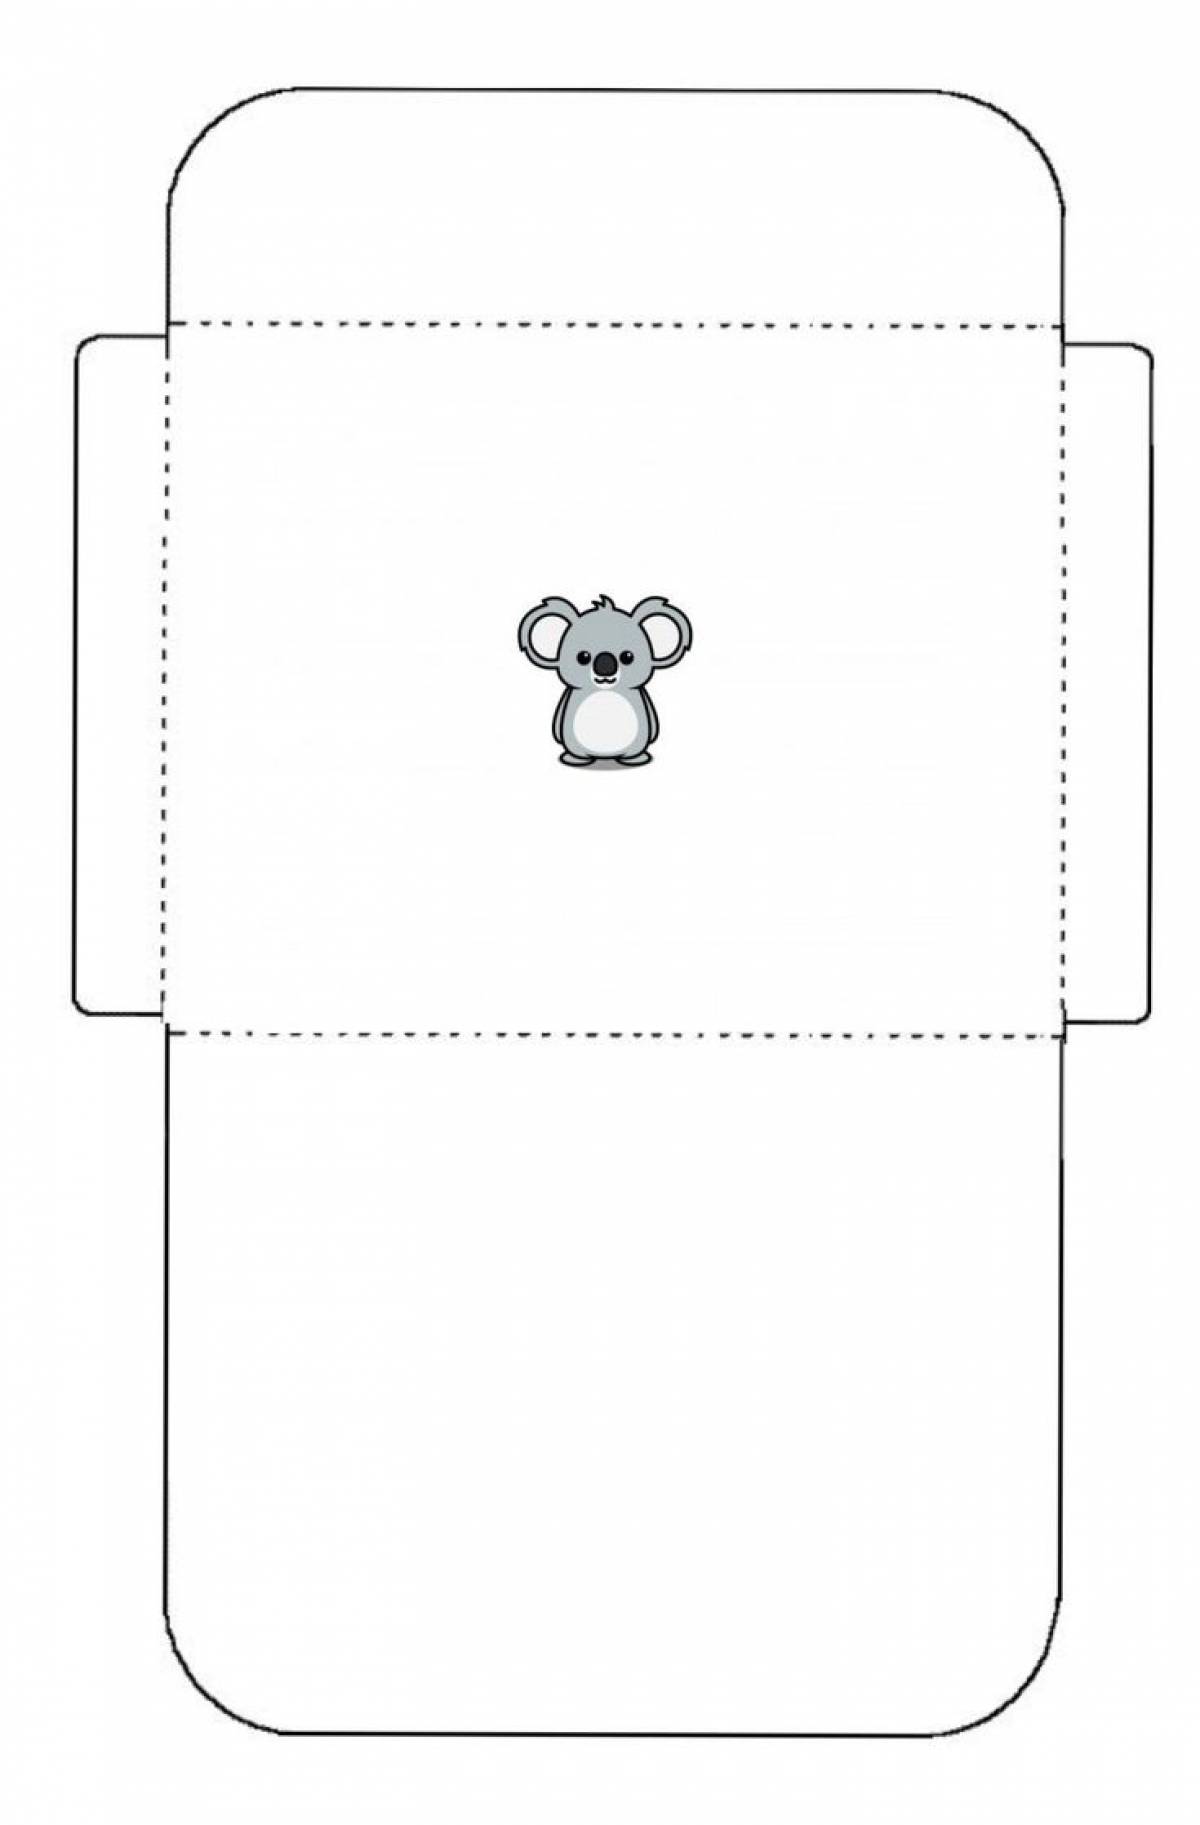 Peace envelope coloring template